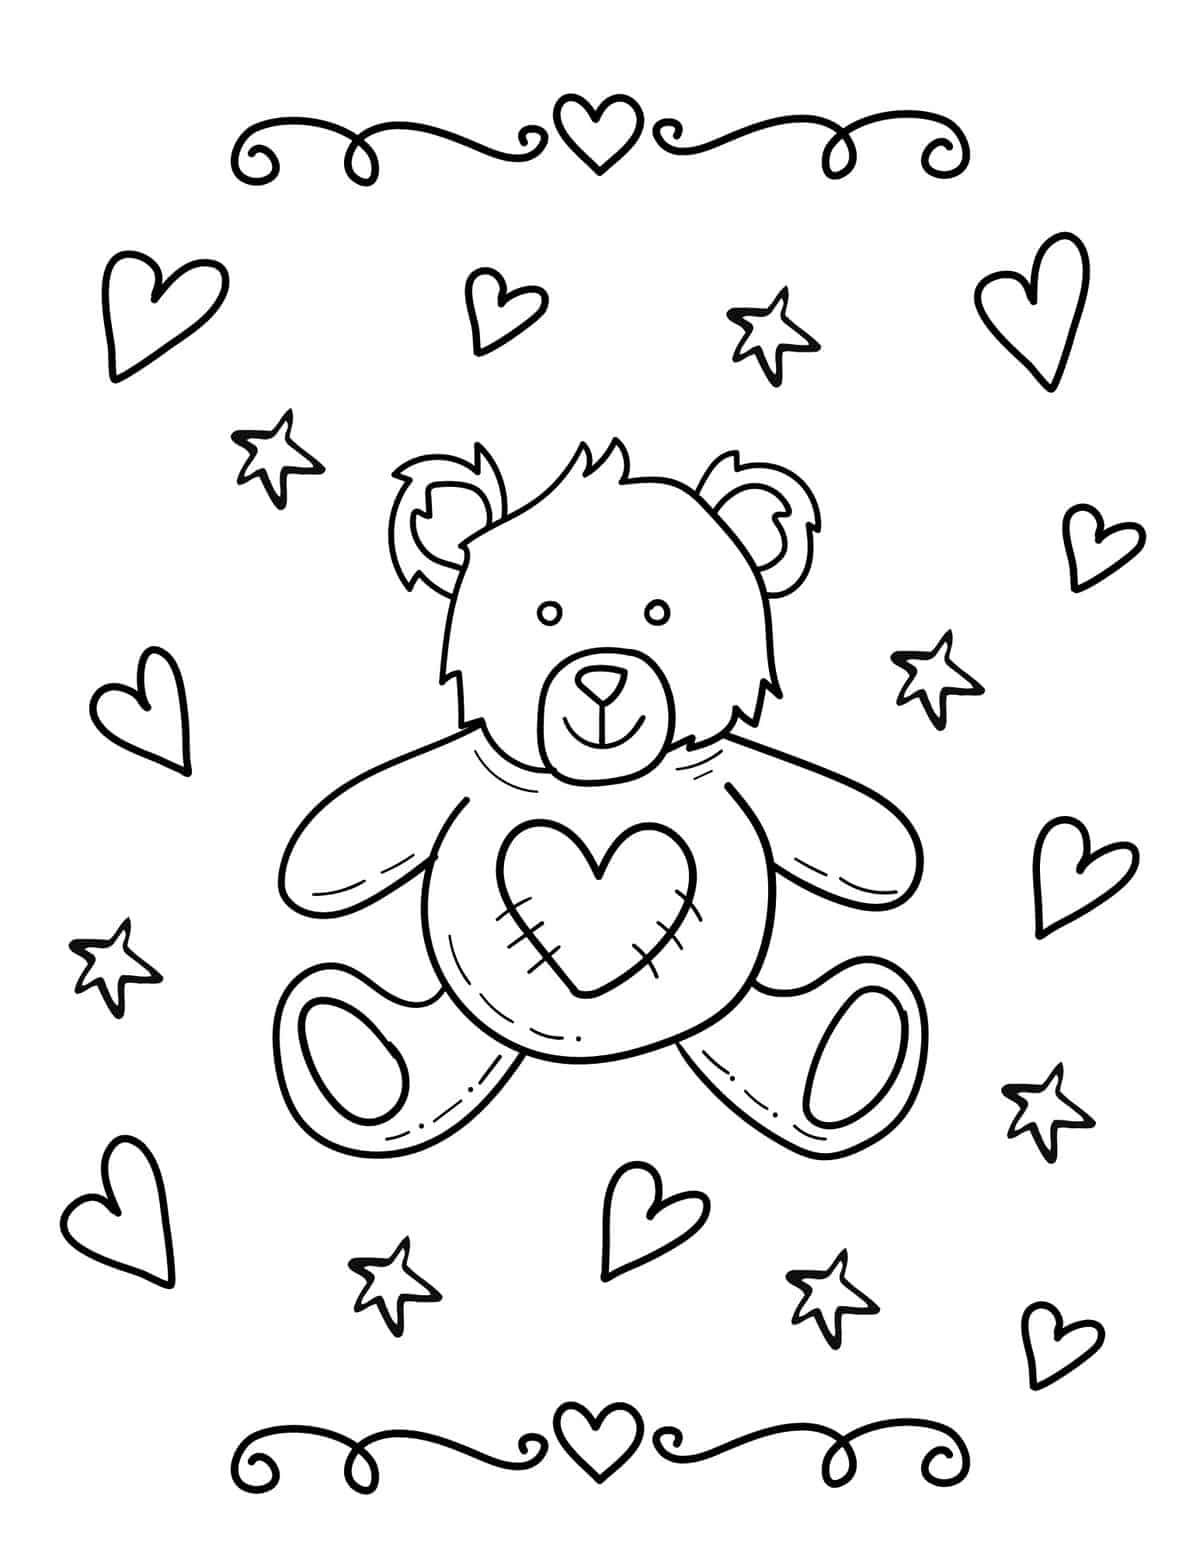 teddy bear surrounded by hearts and stars Valentine's Day coloring page